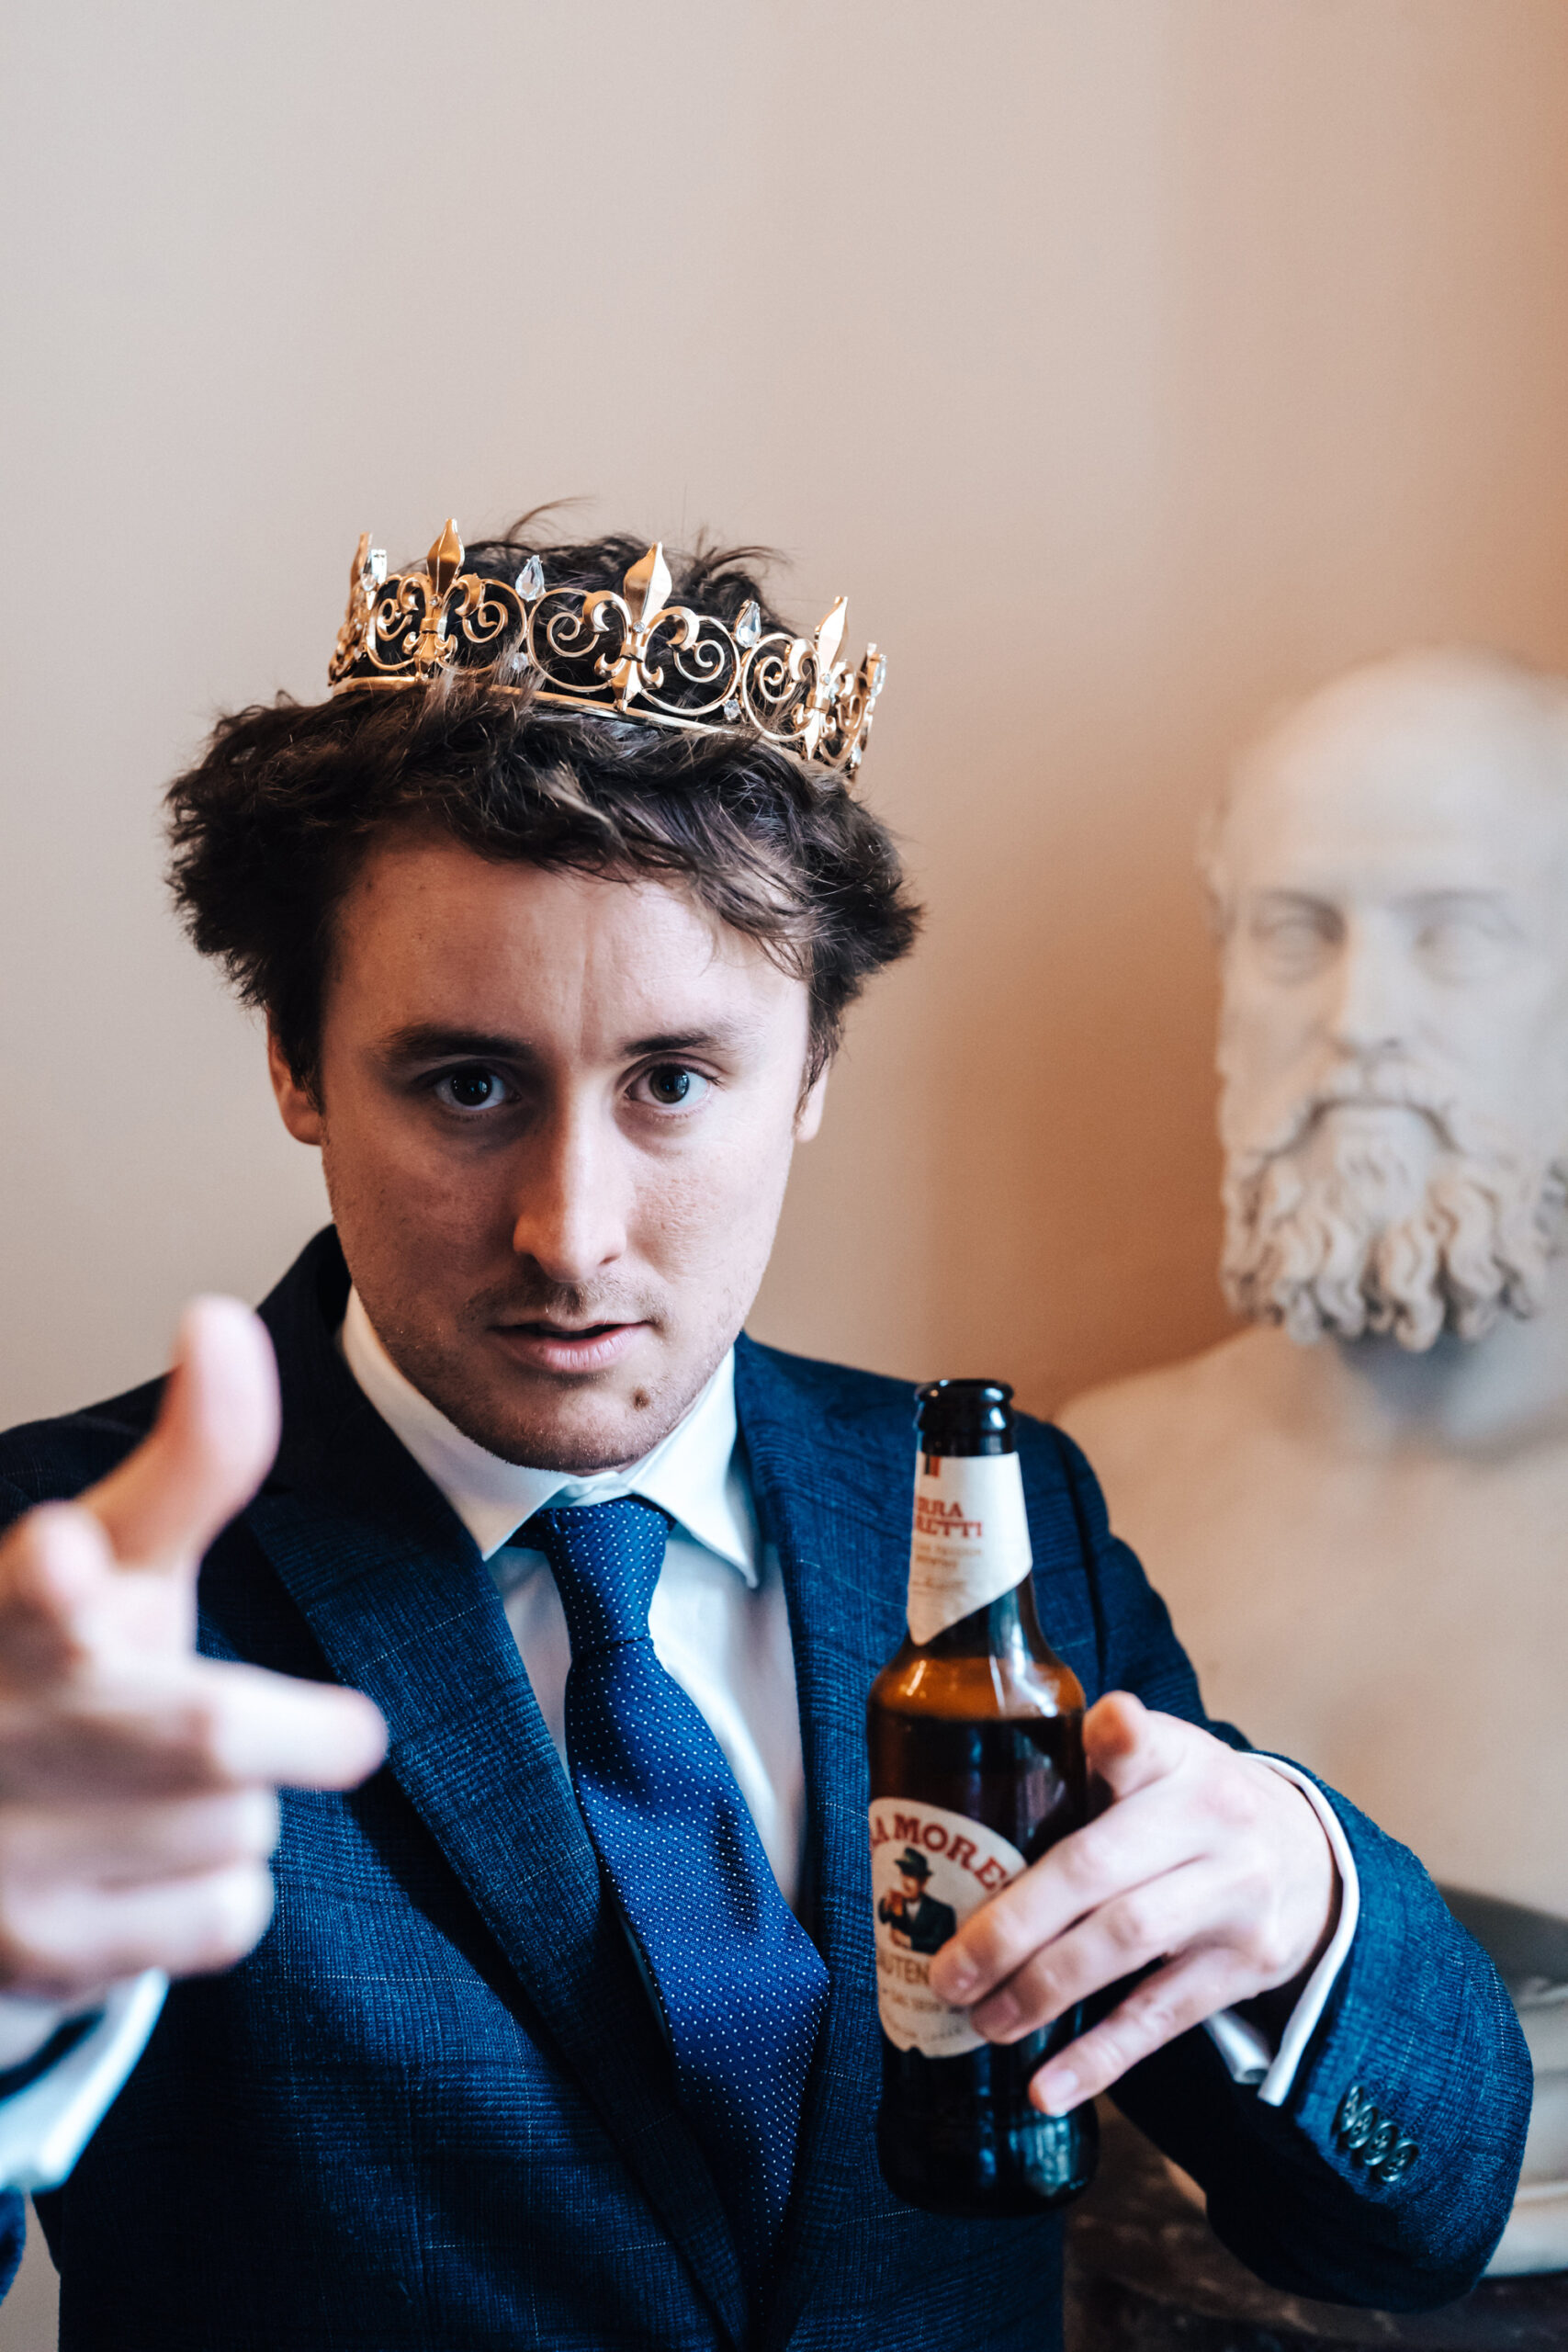 A man wearing a blue formal suit and blue tie with a bottle of beer in his hands and a gold paper crown on his head